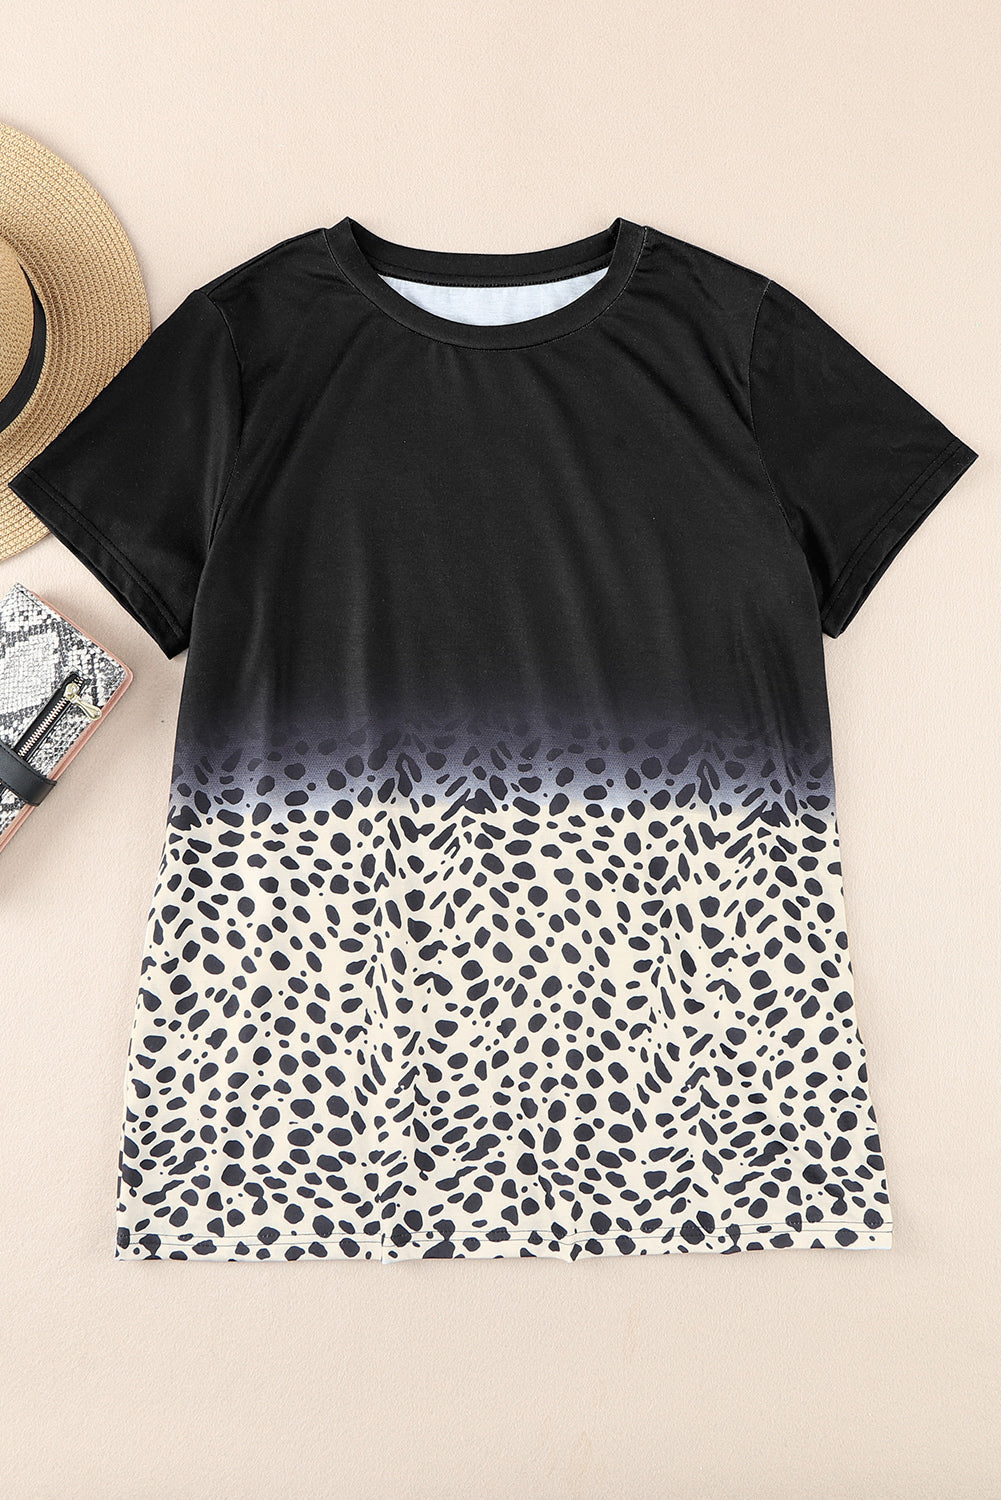 Printed Short Sleeve Round Neck Tee Print on any thing USA/STOD clothes